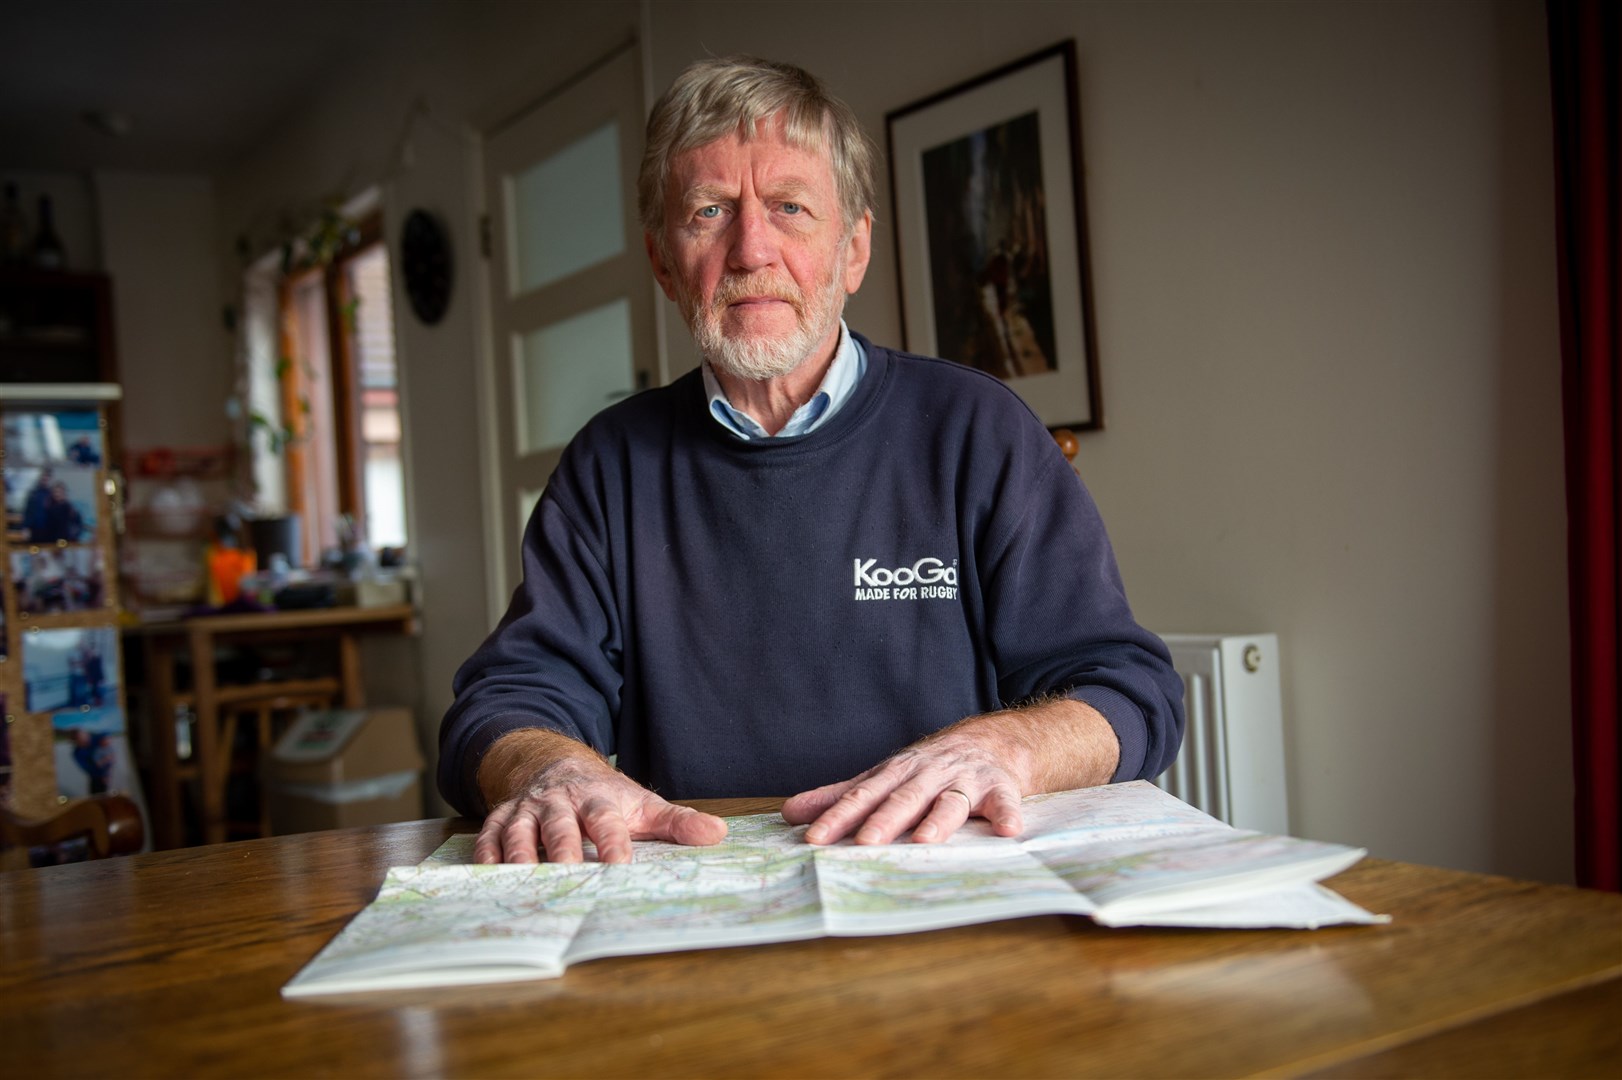 Murdo Macdonald, a renowned biologist, has raised concerns about lack of access to a Highland estate to carry out his work. Picture: Callum Mackay